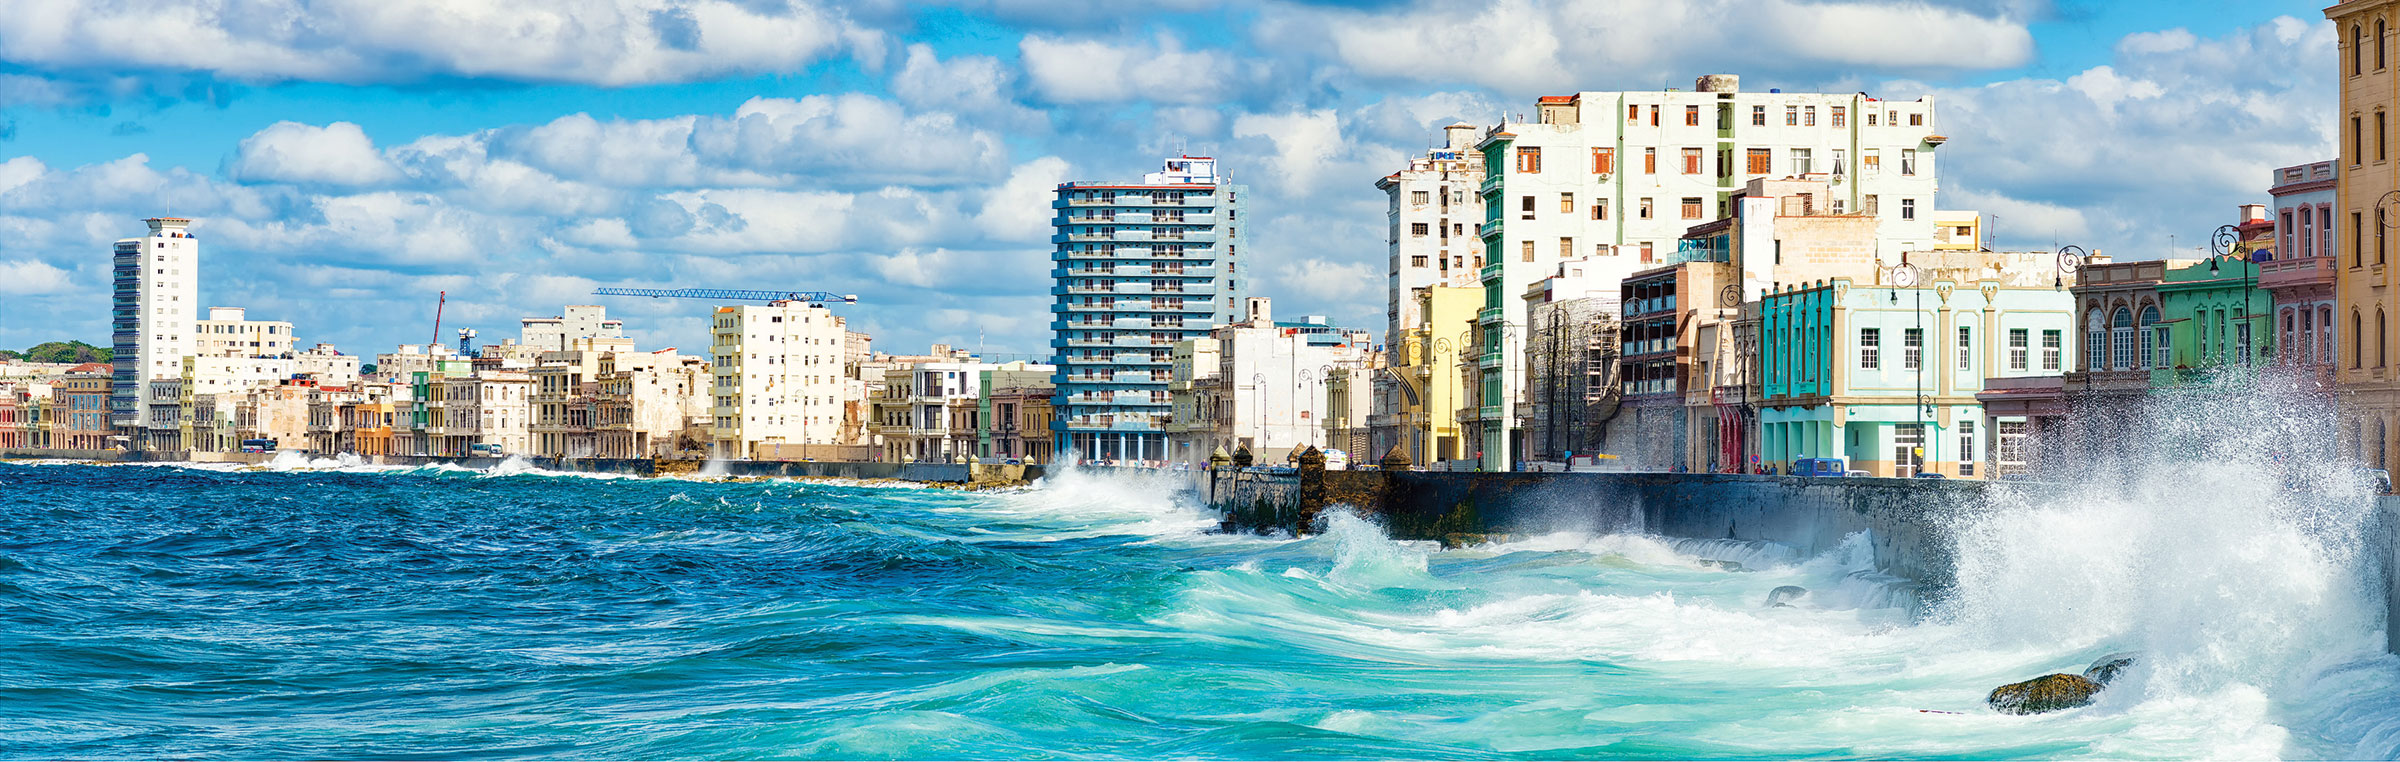 View of the waves and the coastline of the Havana from the malecon